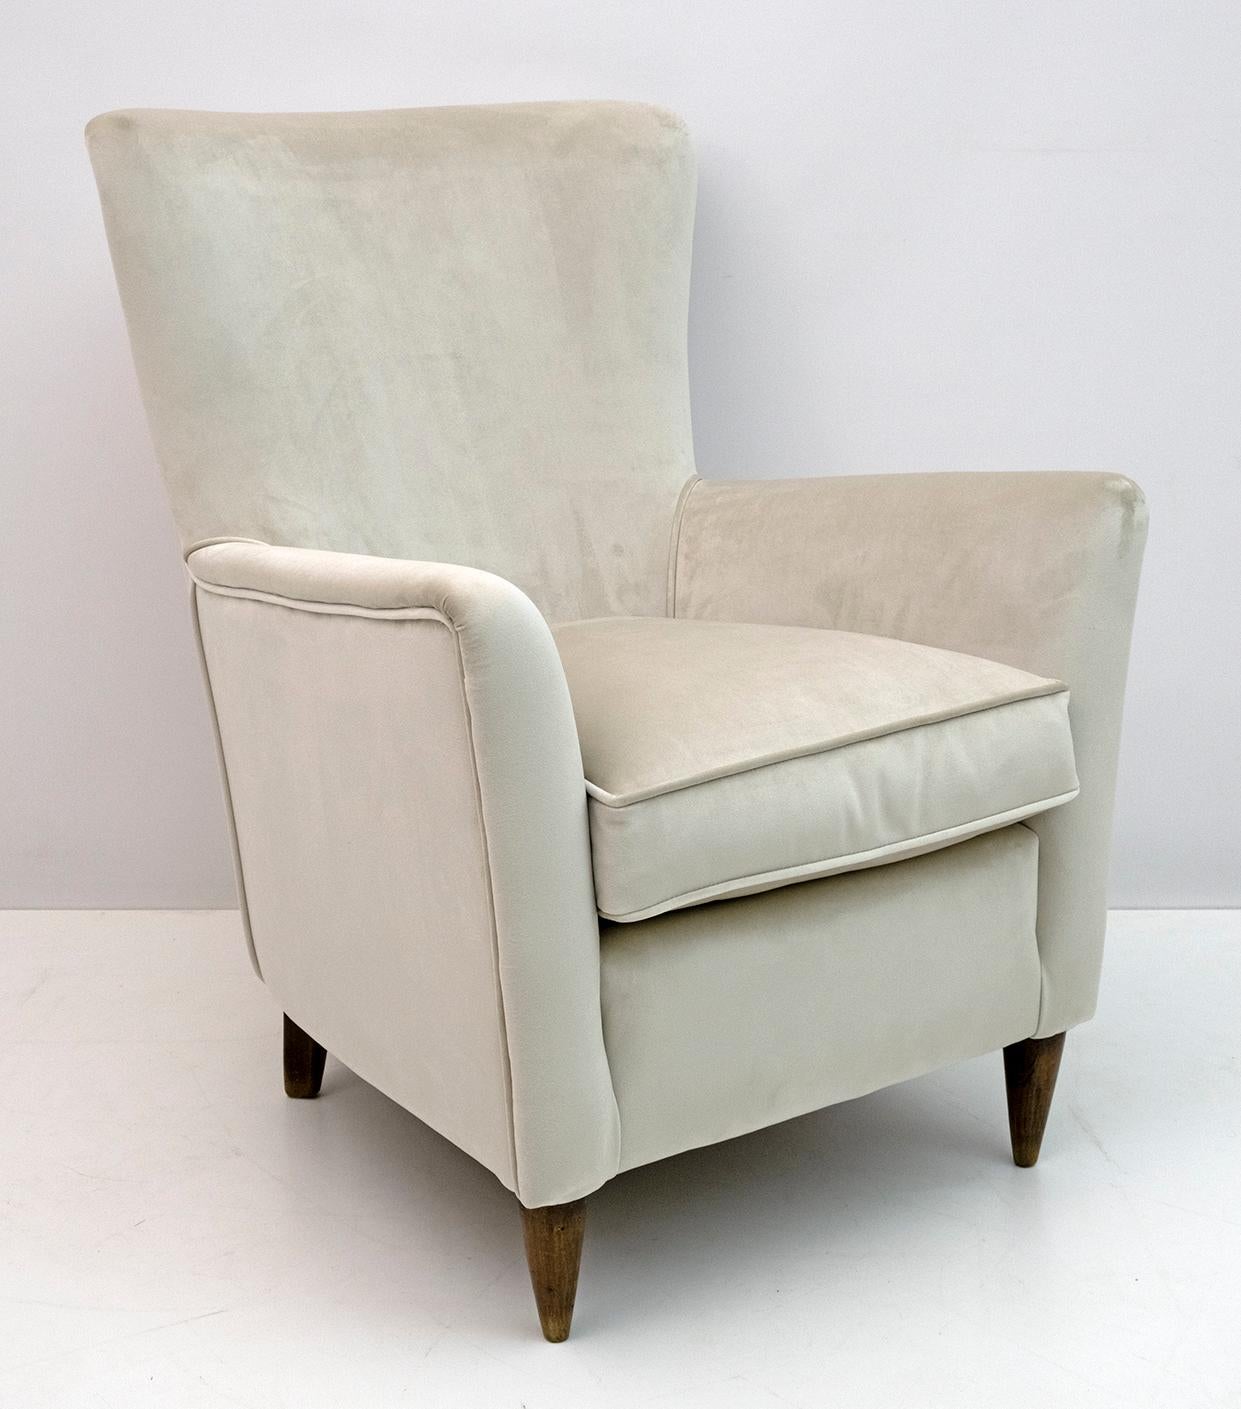 Elegant and splendid pair of Mid-Century Modern armchairs, attributed to Gio Ponti, 1950 for ISA Editions, Bergamo. The armchairs have a new light ivory velvet upholstery.